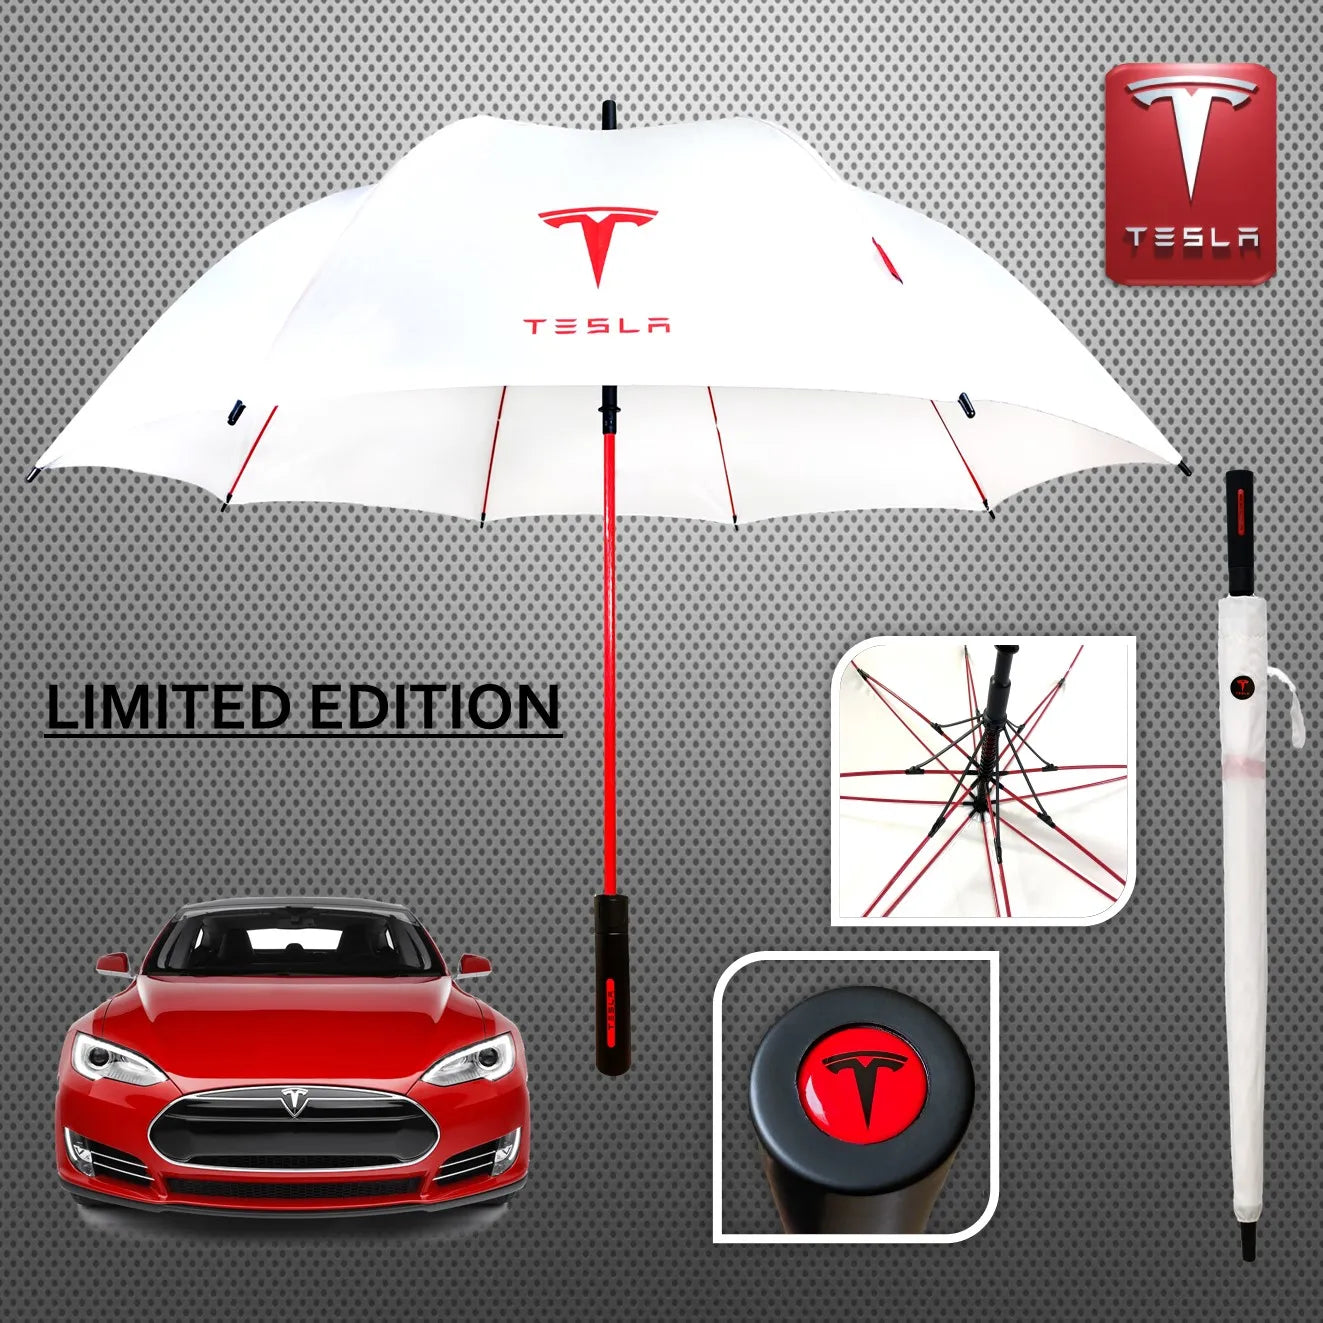 Tesla Model S 3 X Y Car Accessories umbrella Brolly white red strong windproof